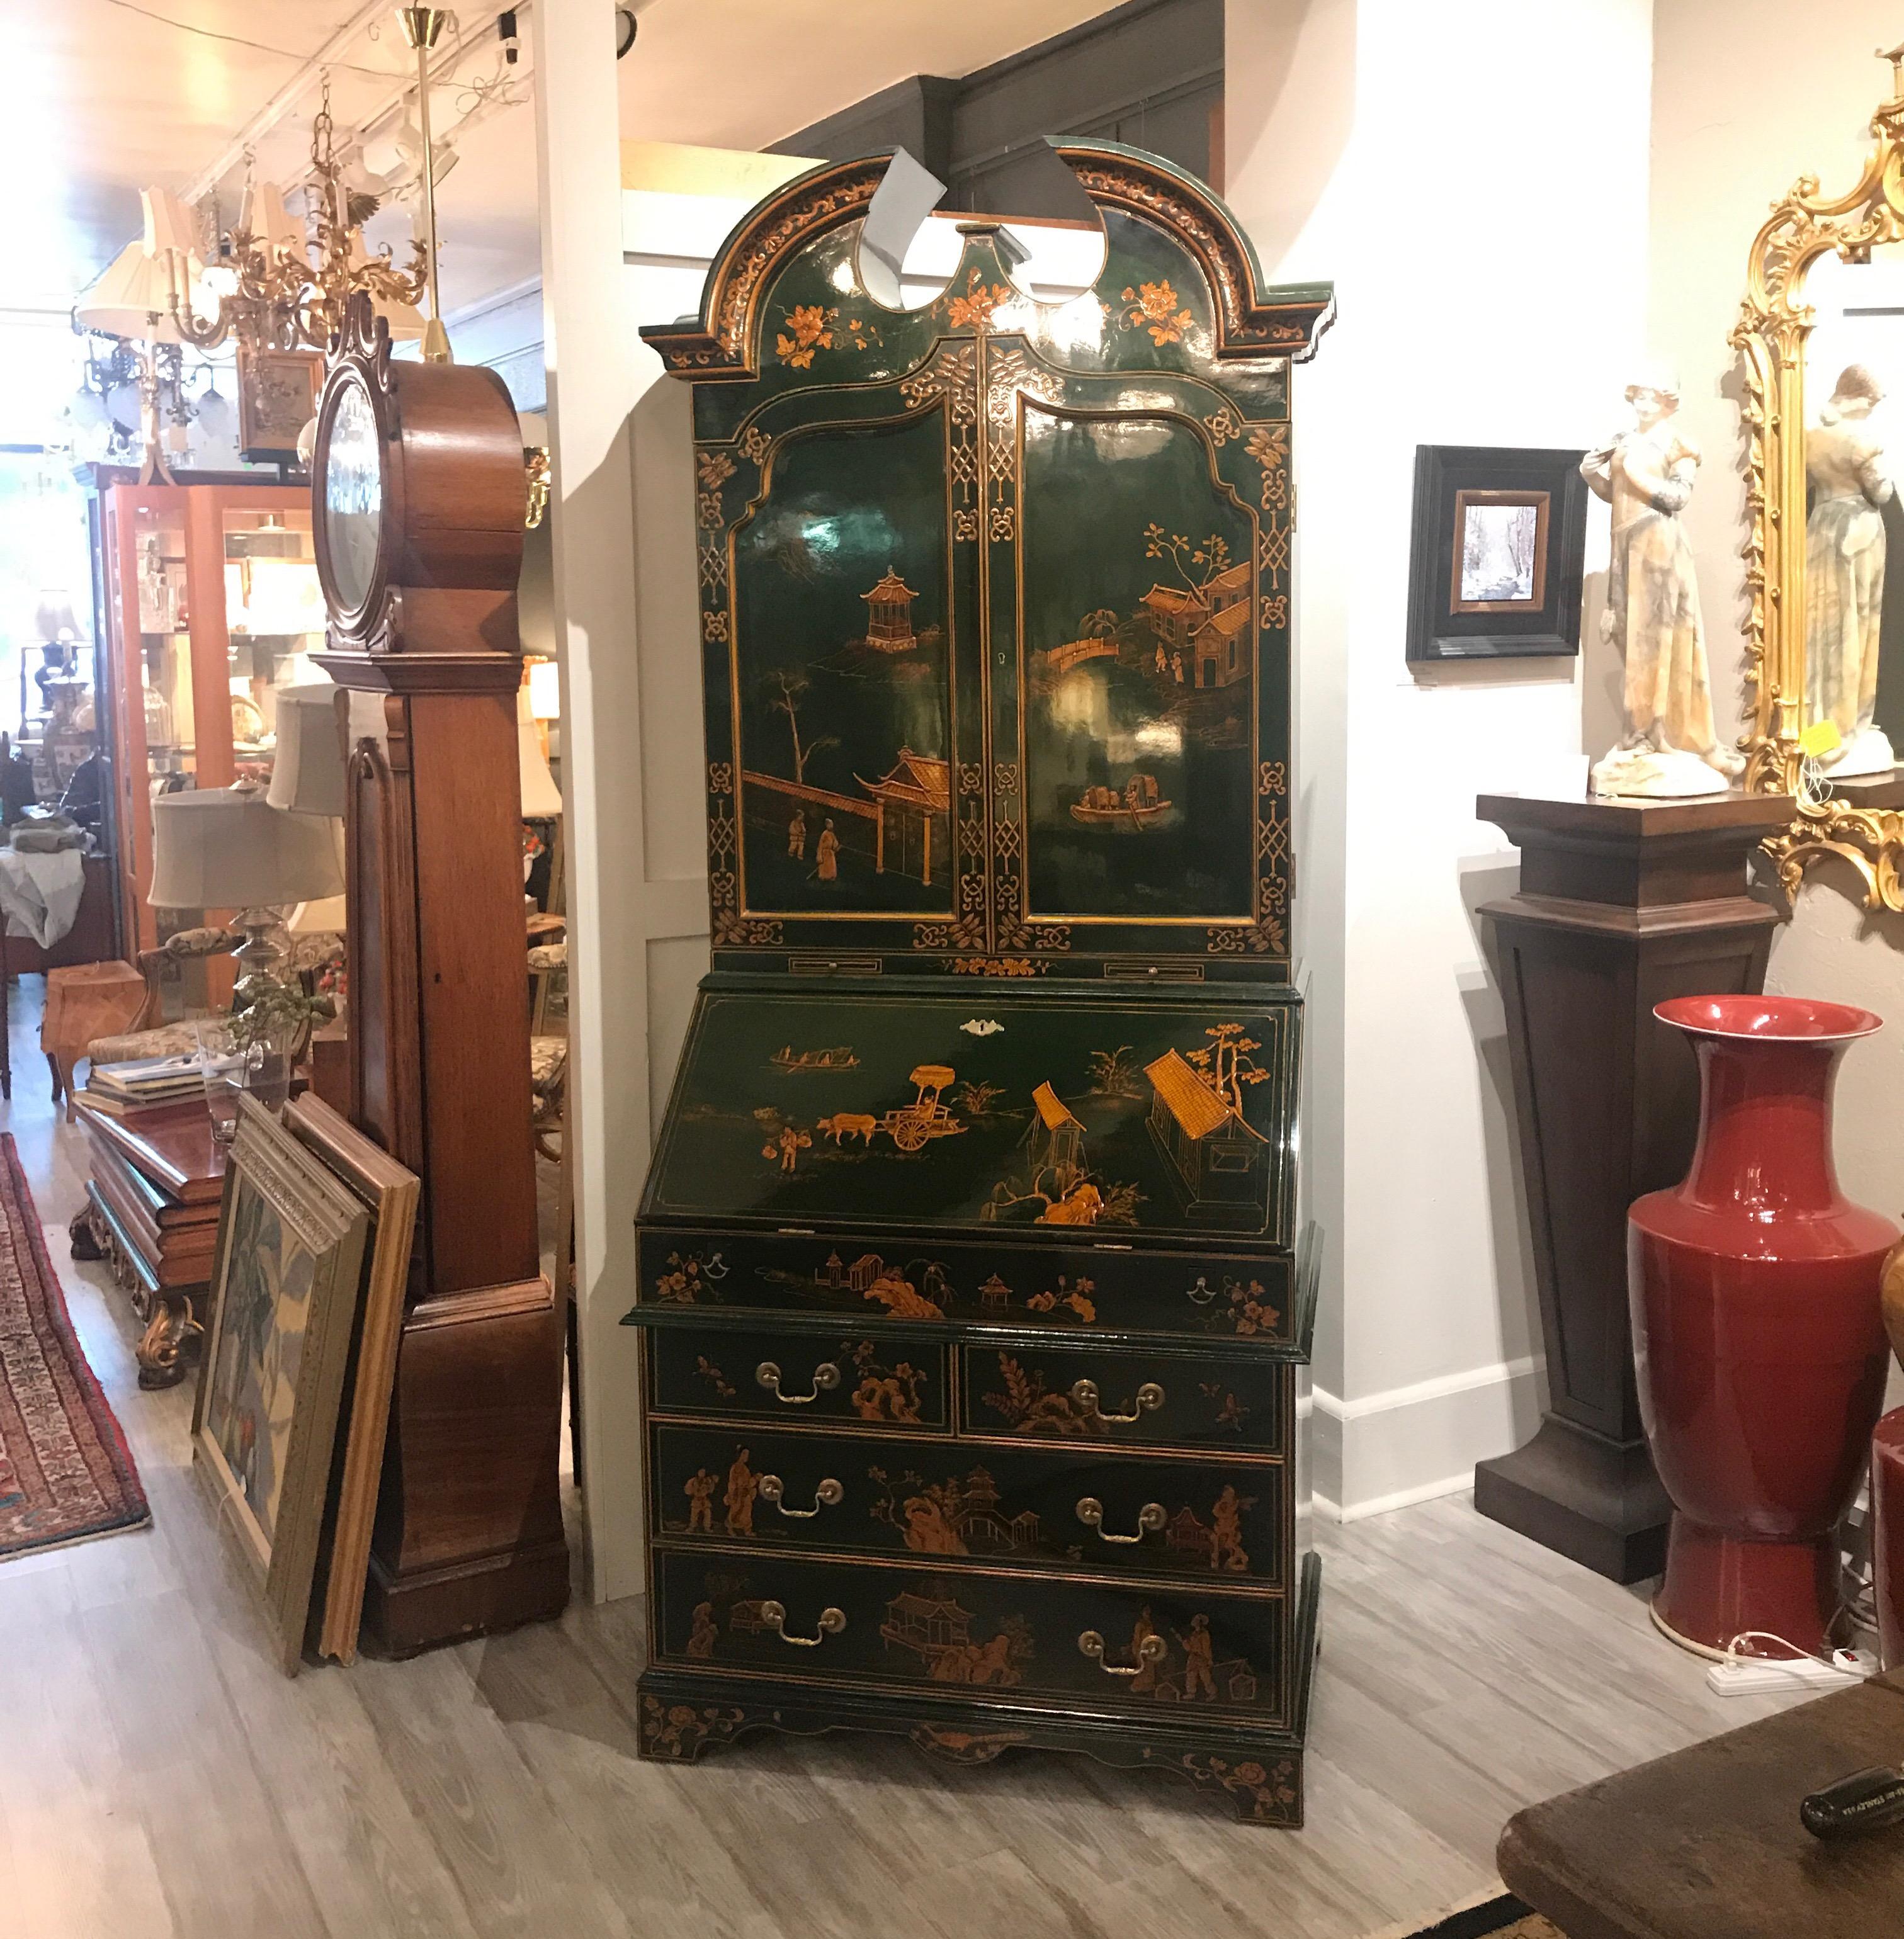 Fabulous lacquered chinoiserie secretary made for Maitland Smith. The interior has many individual drawers and compartments. A drop front desk reveals more drawers. The emerald green lacquered cabinet with hand painted Chinoiserie decoration is a